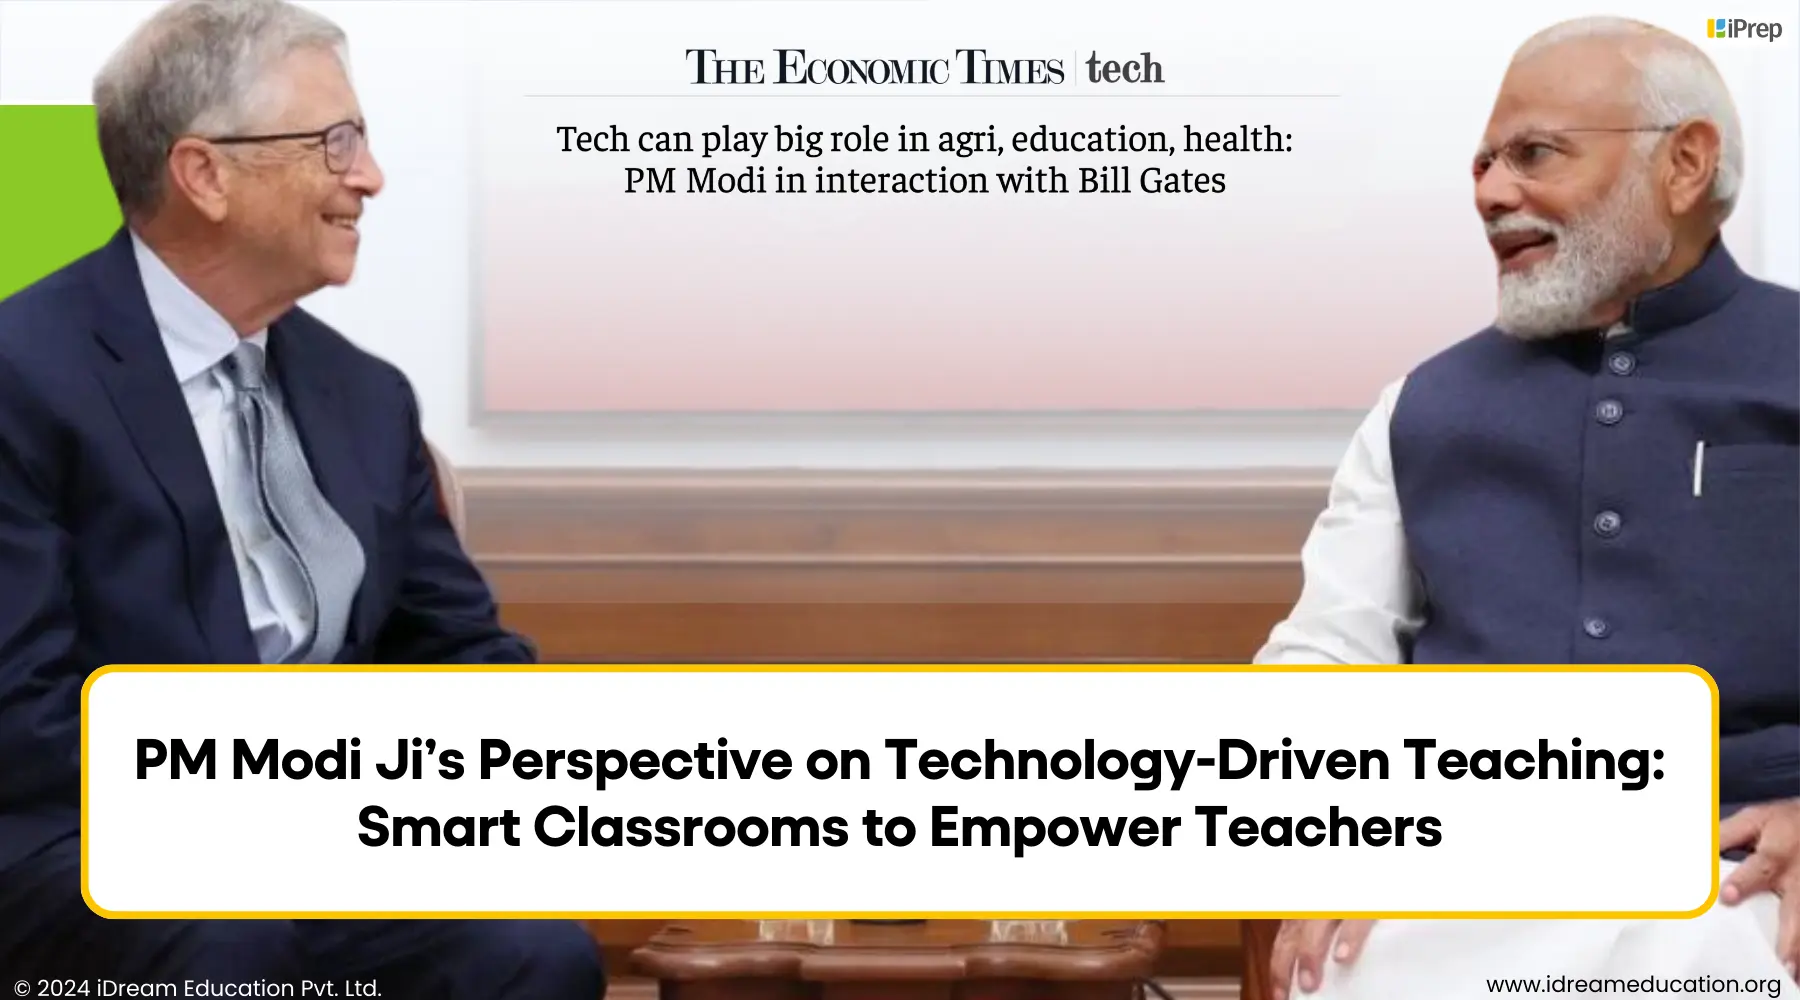 Photograph depicting Prime Minister Modi engaged in a candid conversation with Bill Gates on topics such as artificial intelligence, digital infrastructure, and technology-driven teaching